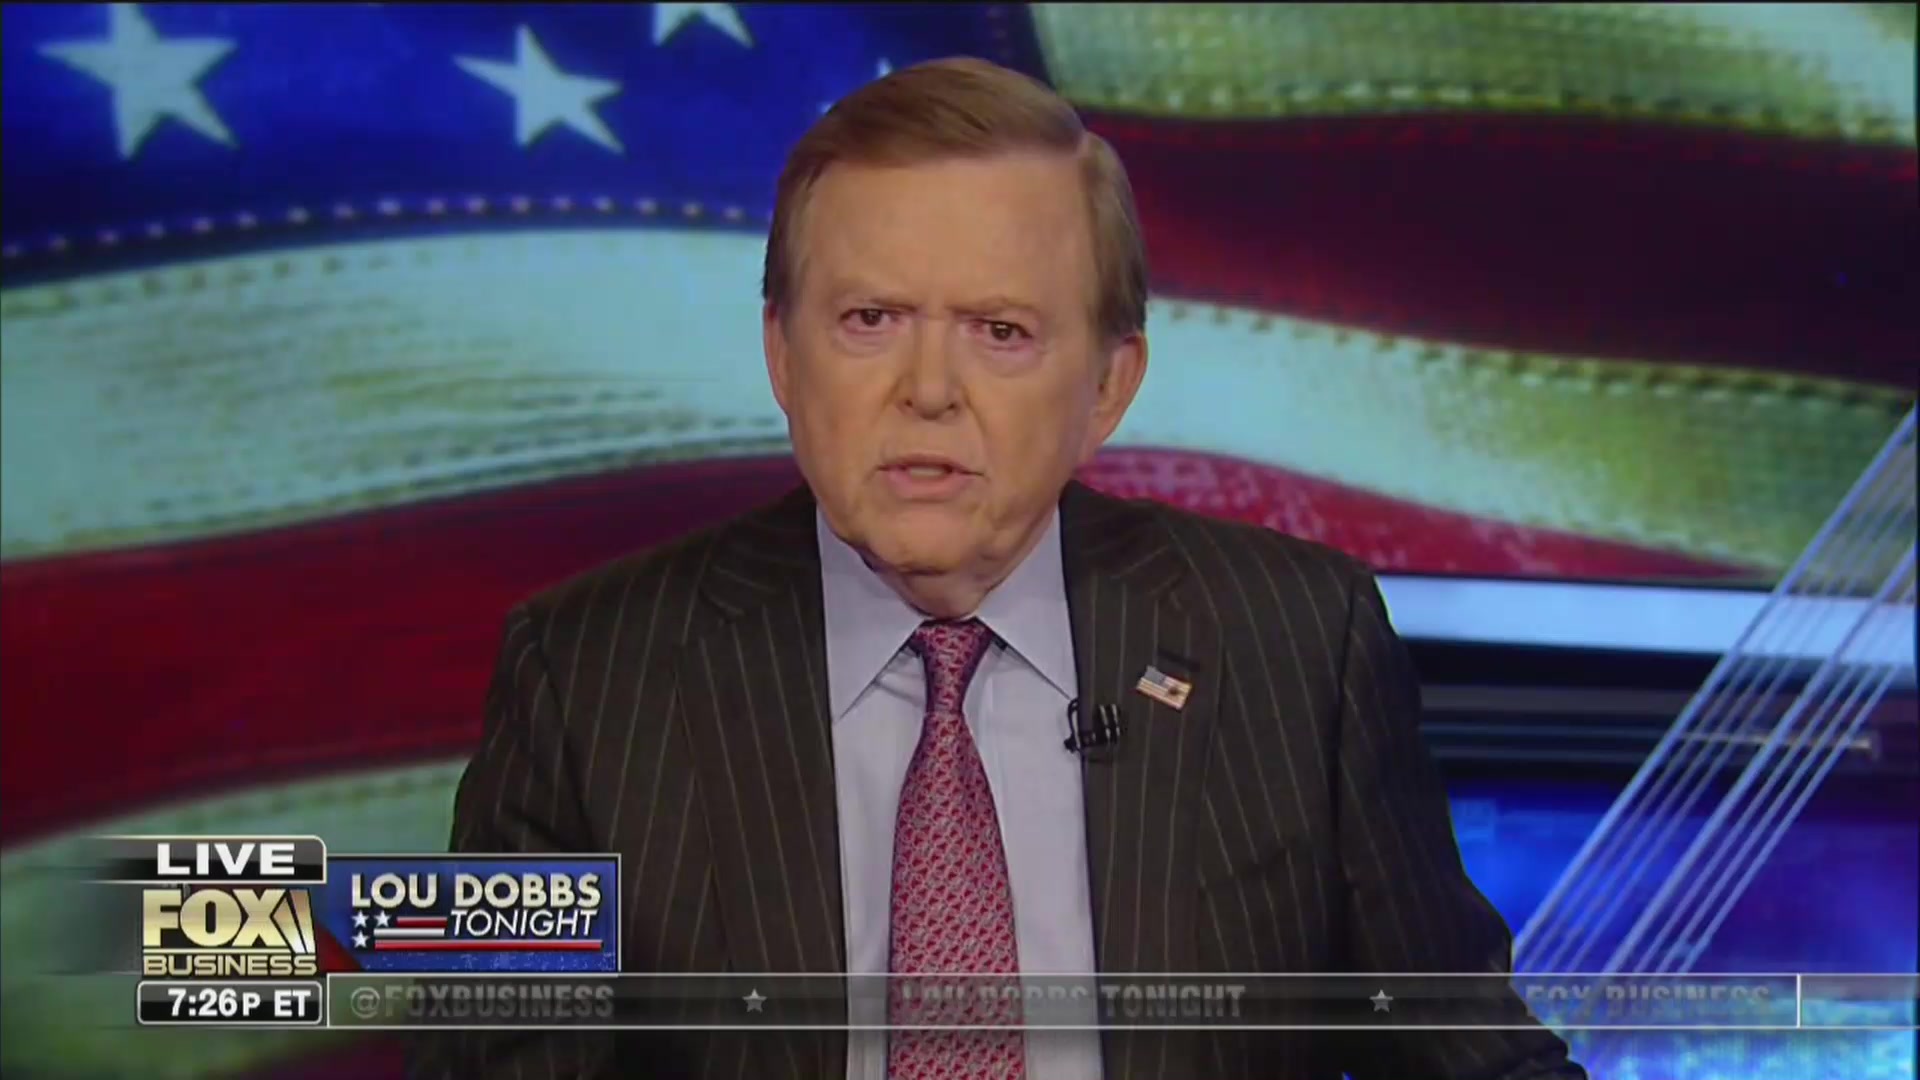 WATCH: Lou Dobbs Issues Correction for Airing Inaccurate Graphic on Trump’s ‘Soaring’ Approval